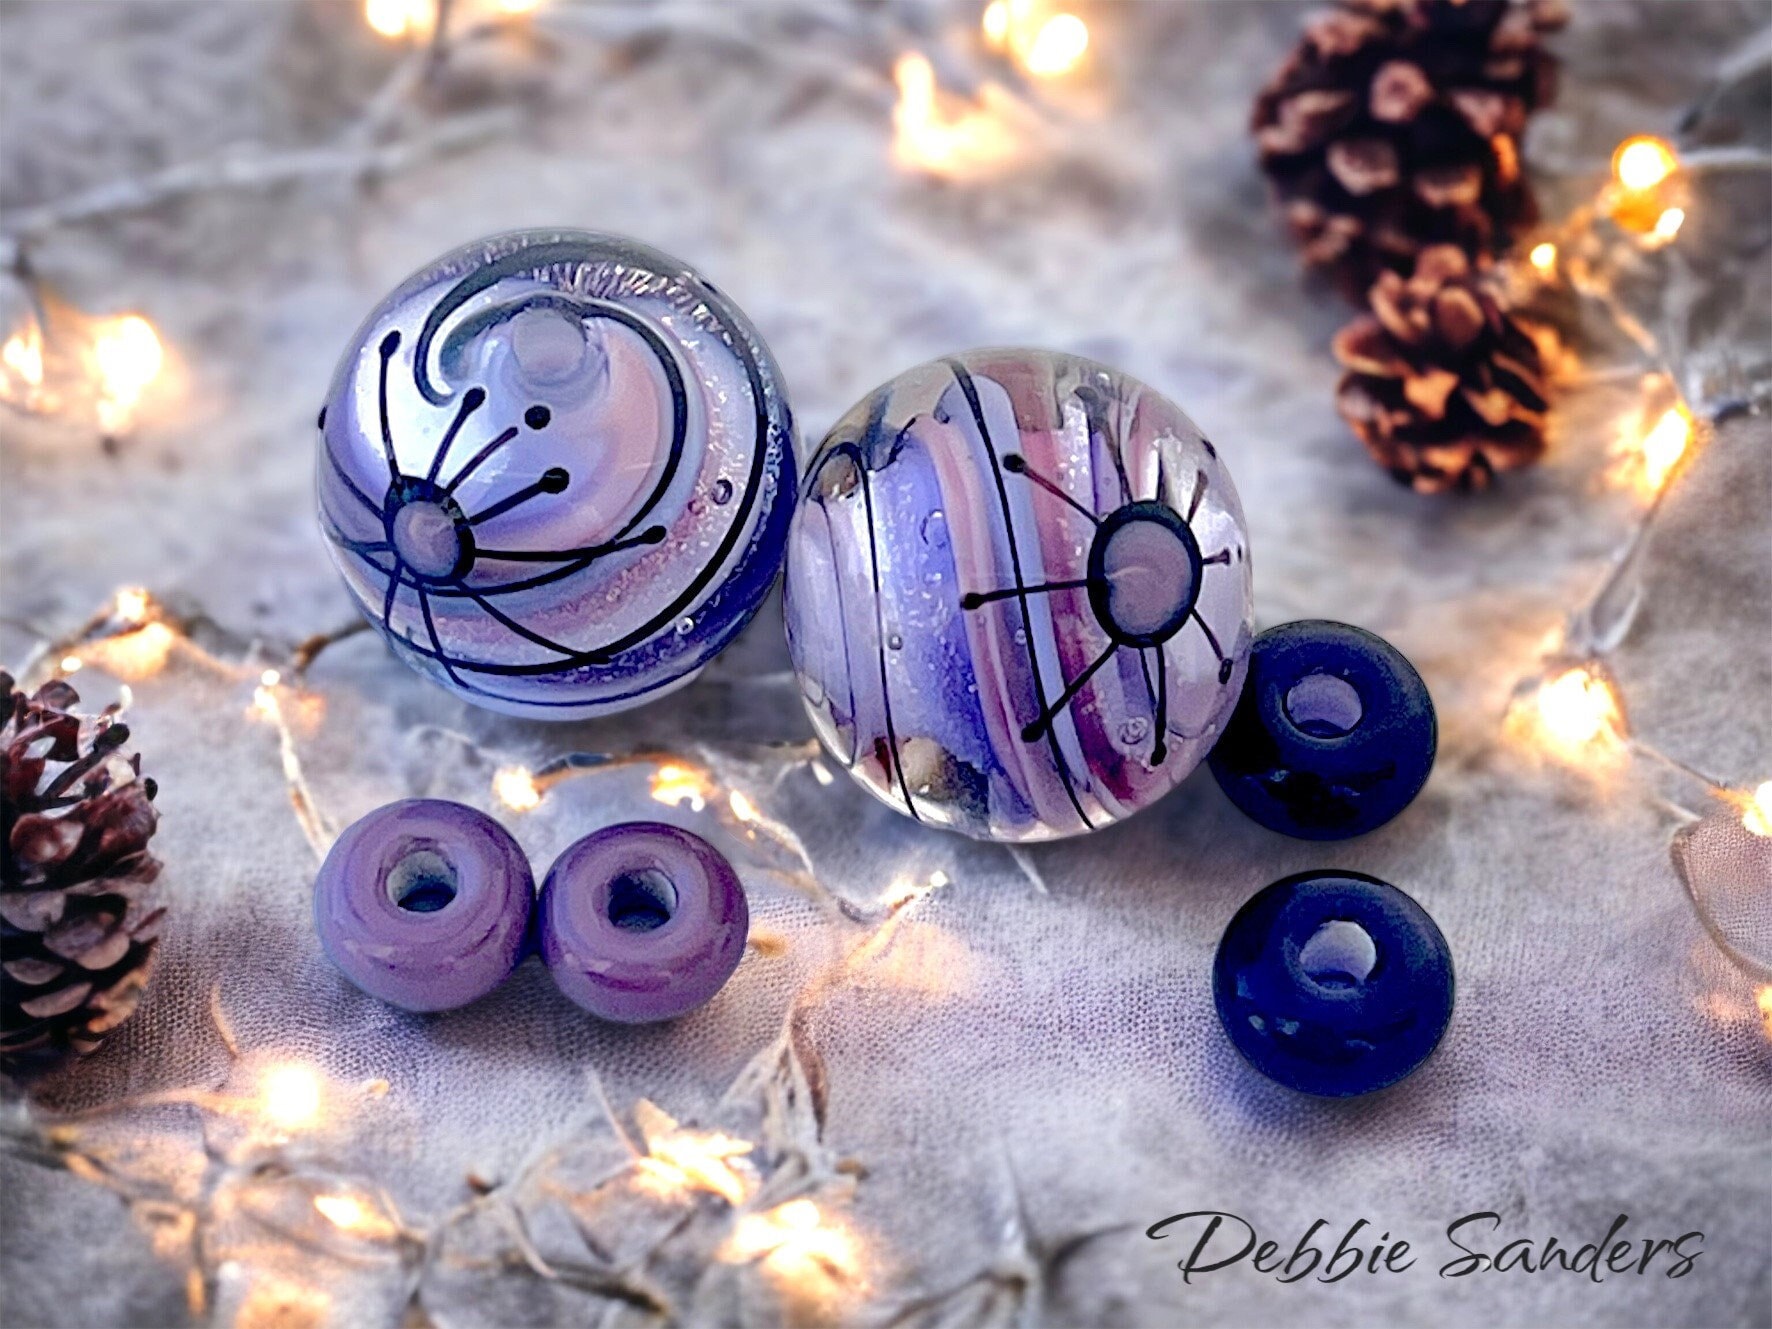 Purple Lampwork Beads For Jewelry Supplies, Handmade Lentil Glass Beads For  Jewelry Making, Beads For Craft Supplies, Beads For Earrings